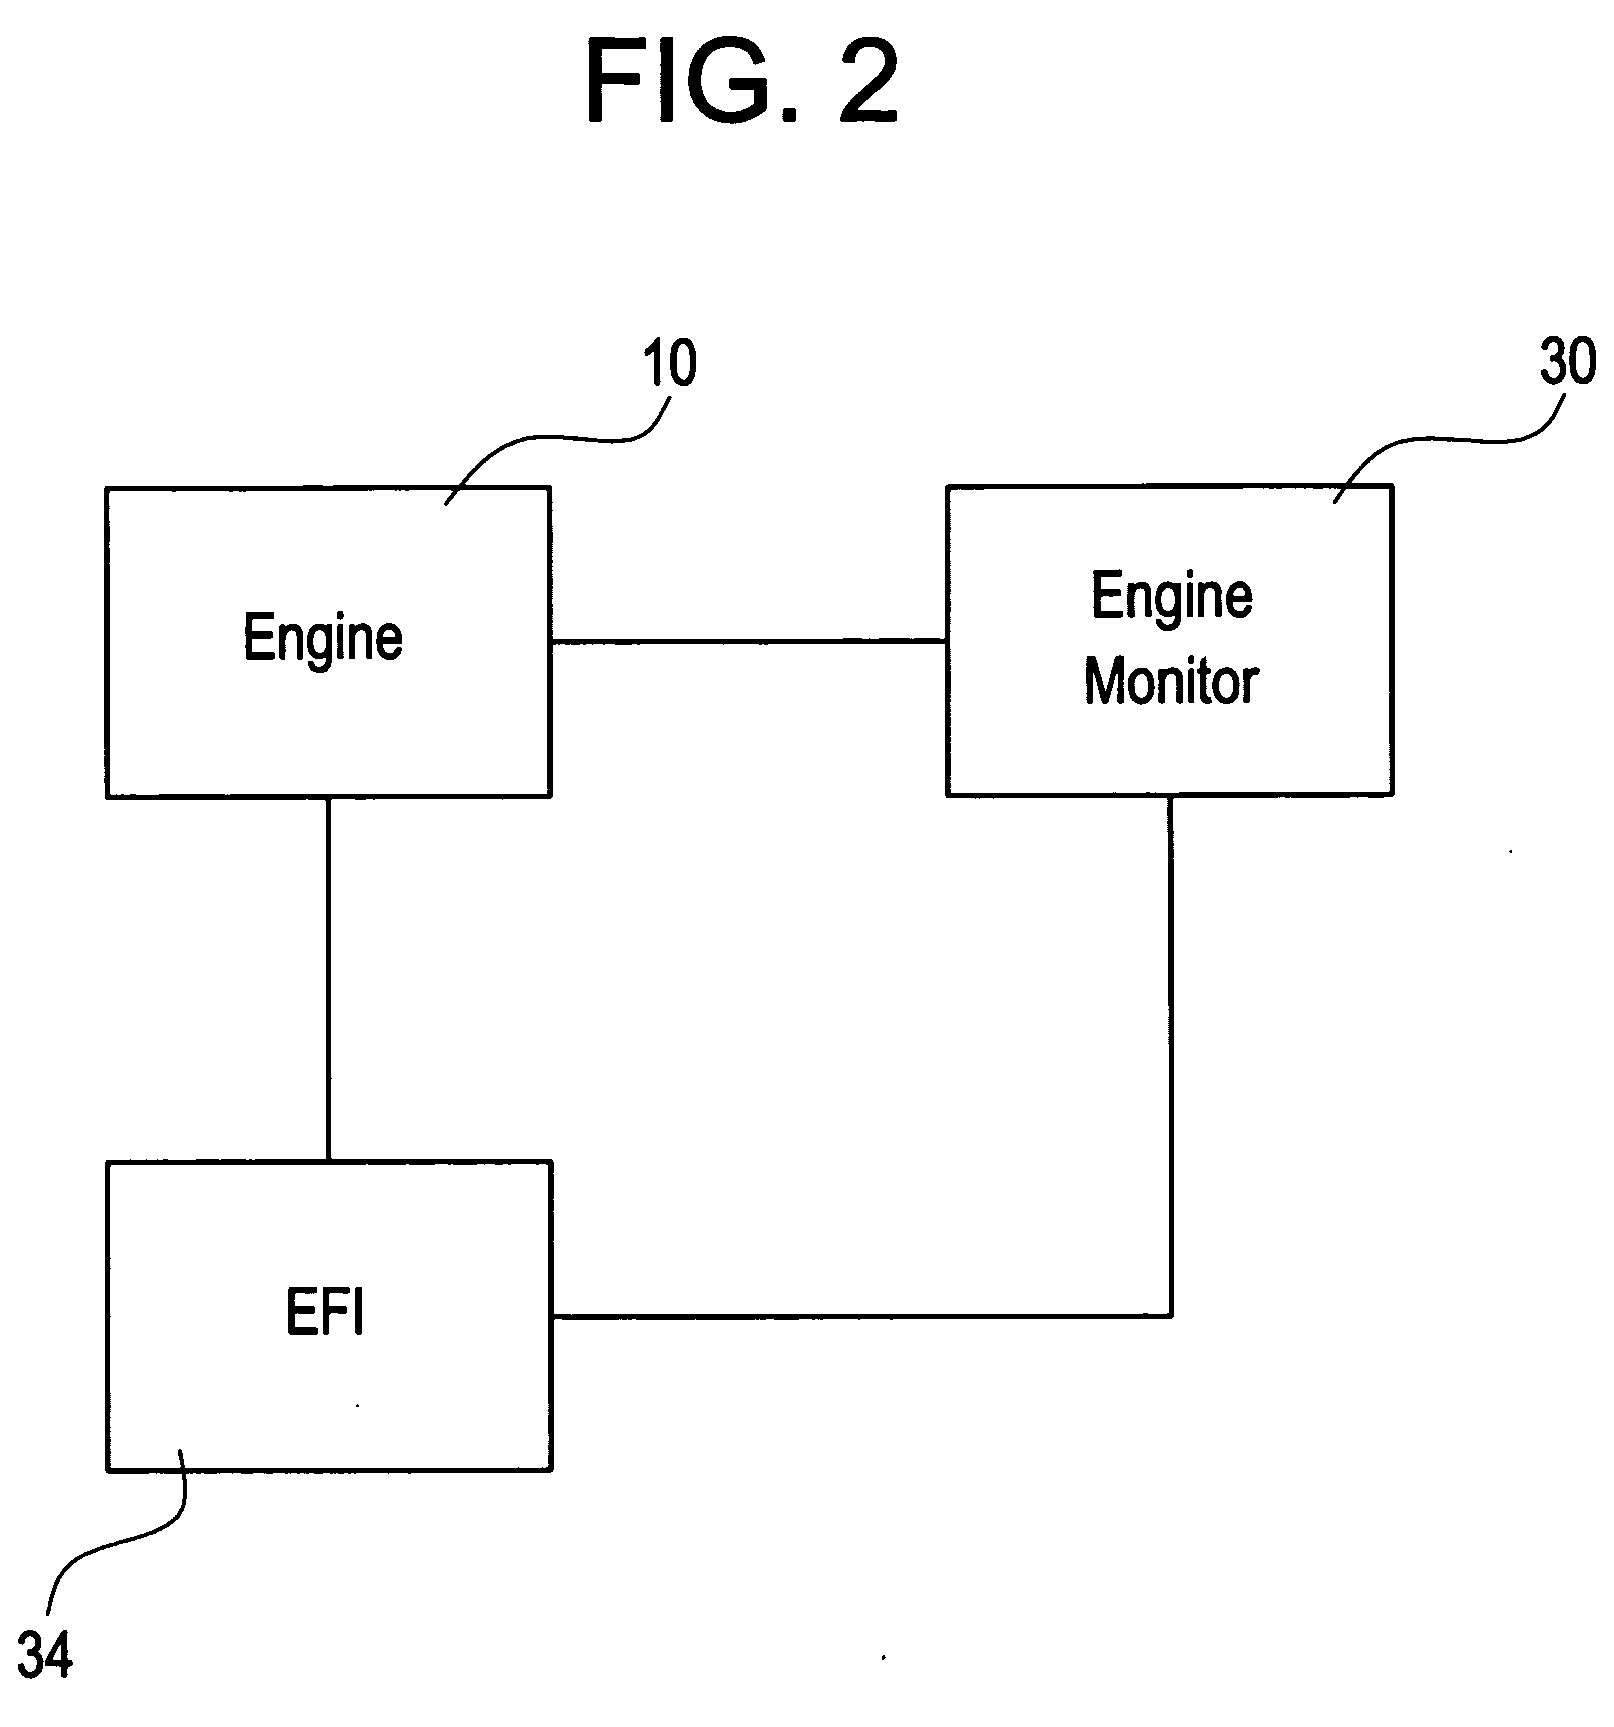 Apparatus and method for suppressing internal combustion ignition engine emissions